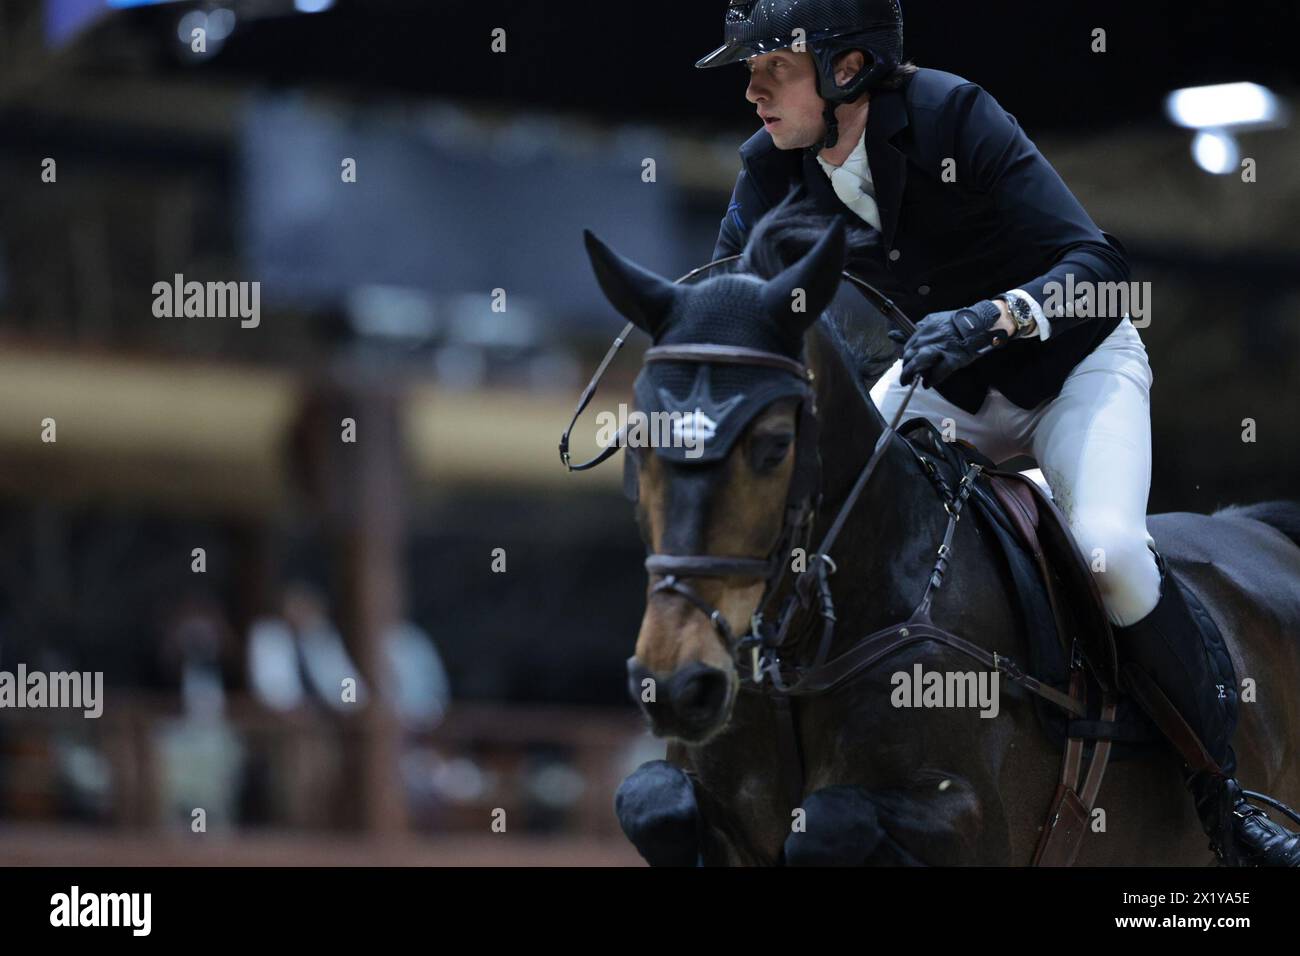 Martin Fuchs of Switzerland with Commissar Pezi during the Longines FEI Jumping World Cup™ - Final II at the FEI World Cup™ Finals Riyadh on April 18, 2024, Riyadh International Convention and Exhibition Center, Kingdom of Saudi Arabia (Photo by Maxime David - MXIMD Pictures) Stock Photo